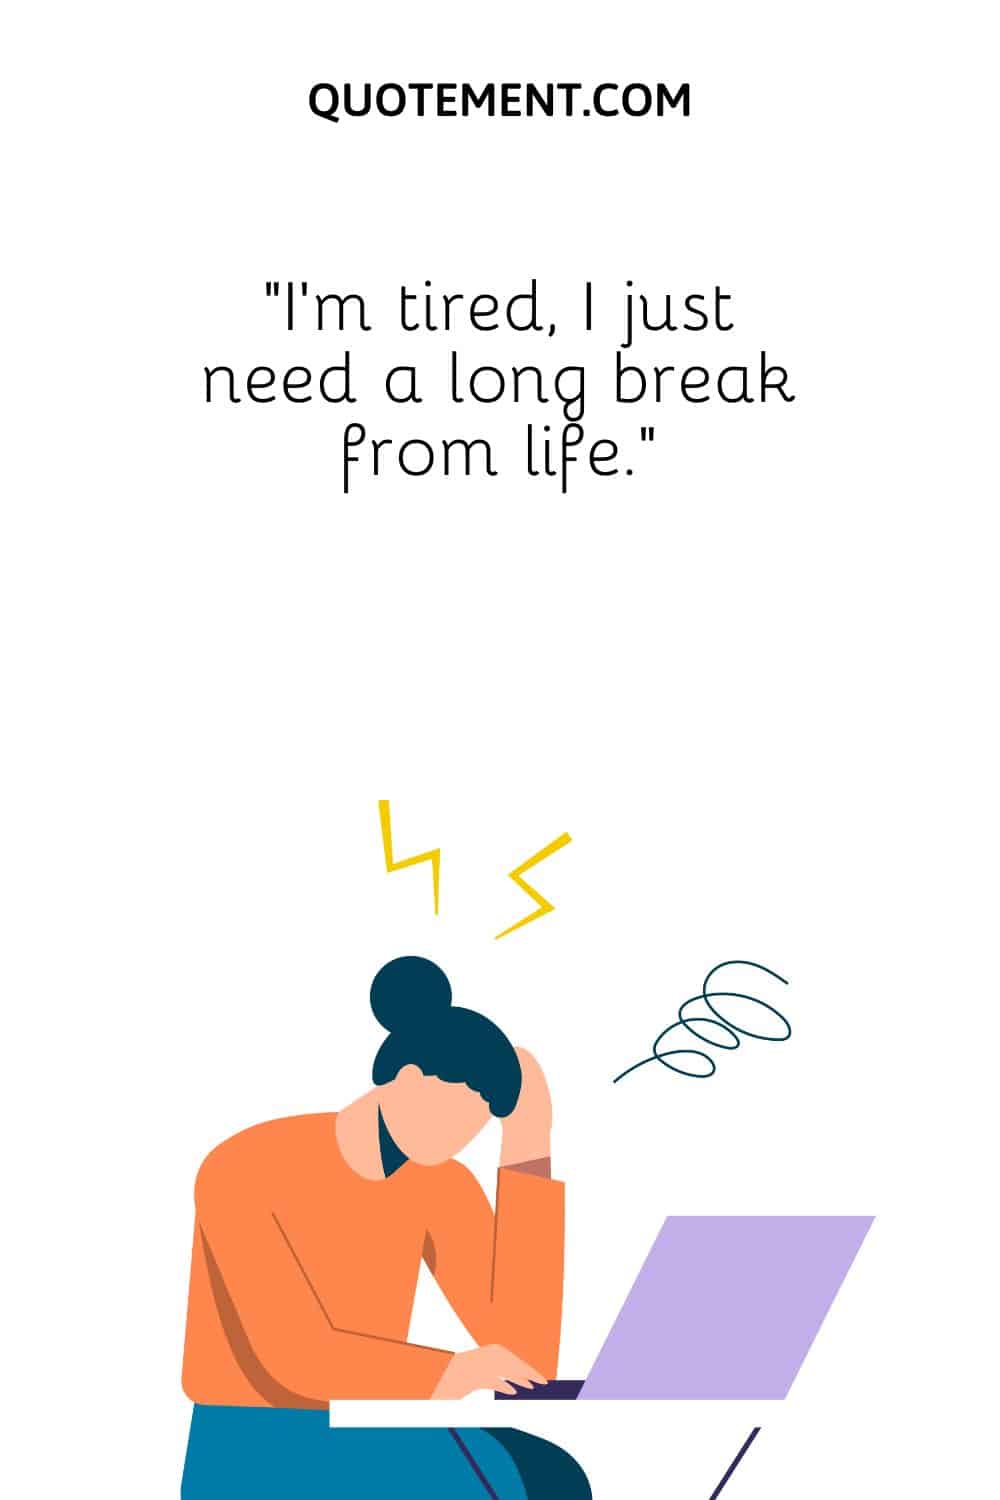 “I’m tired, I just need a long break from life